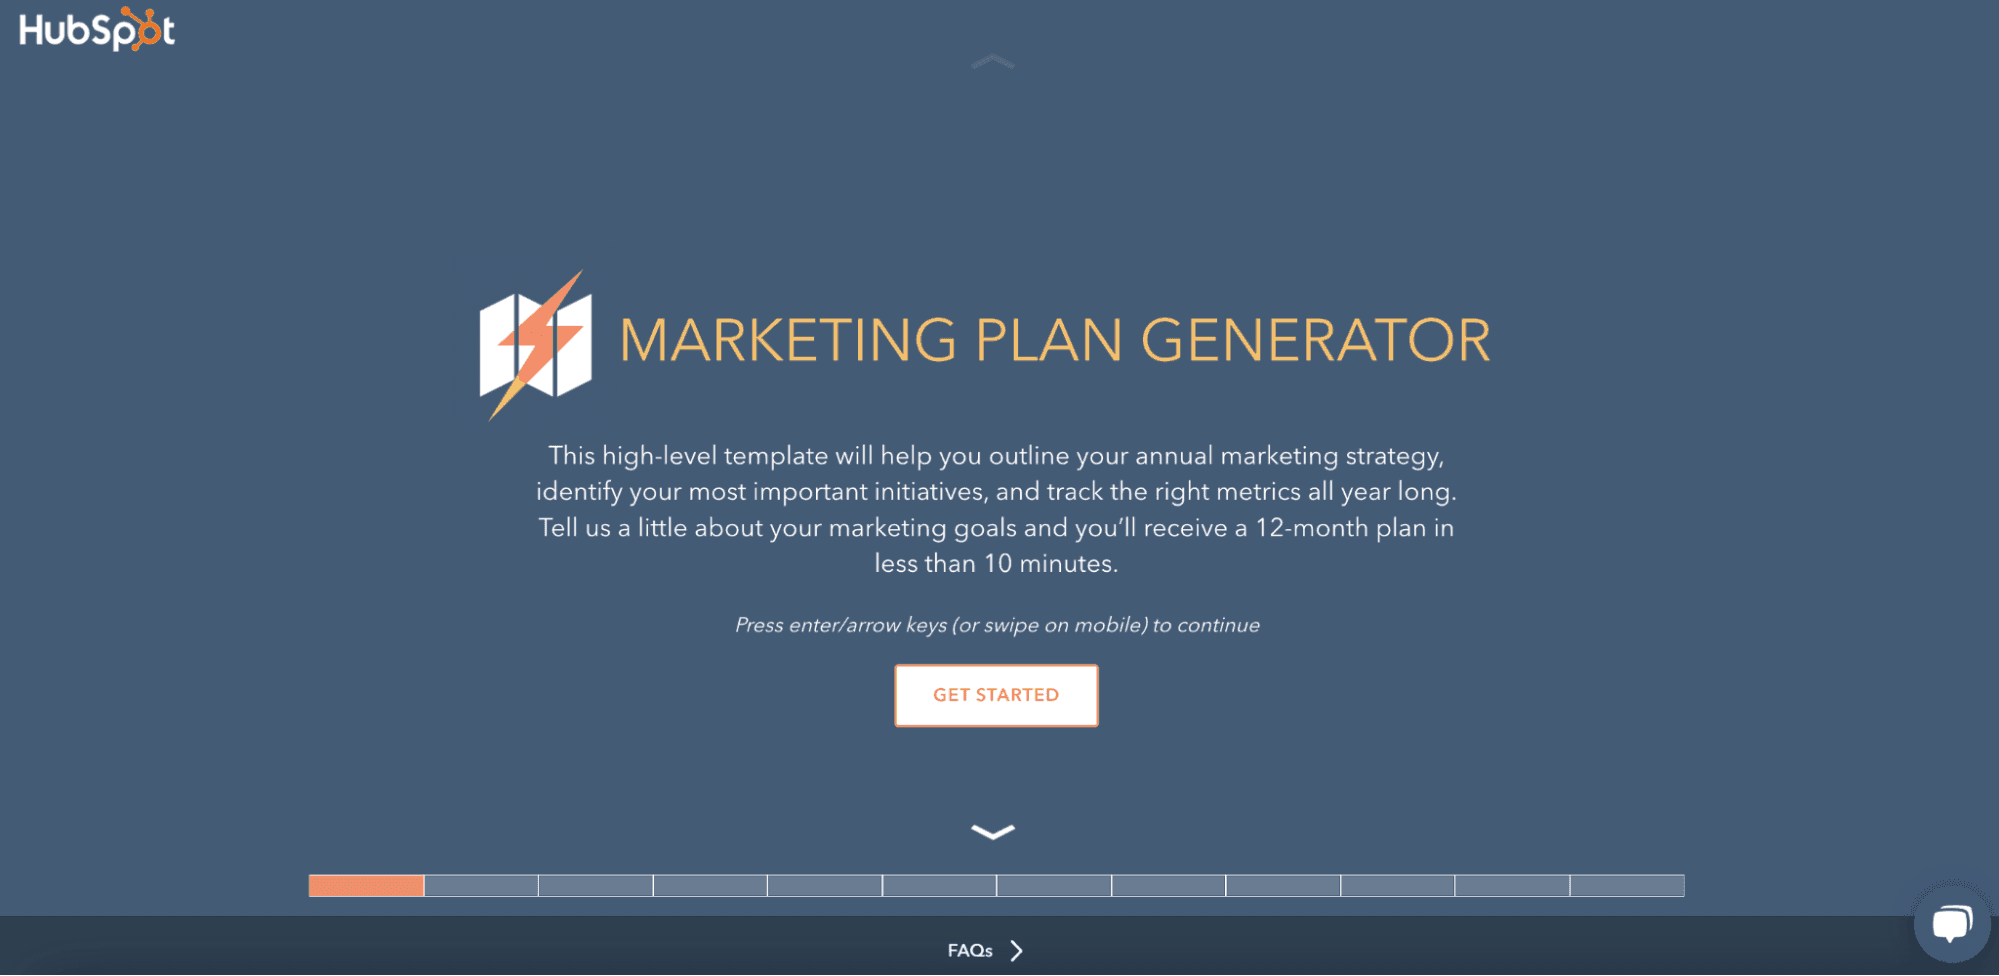 Landing page of the marketing plan generator from HubSpot